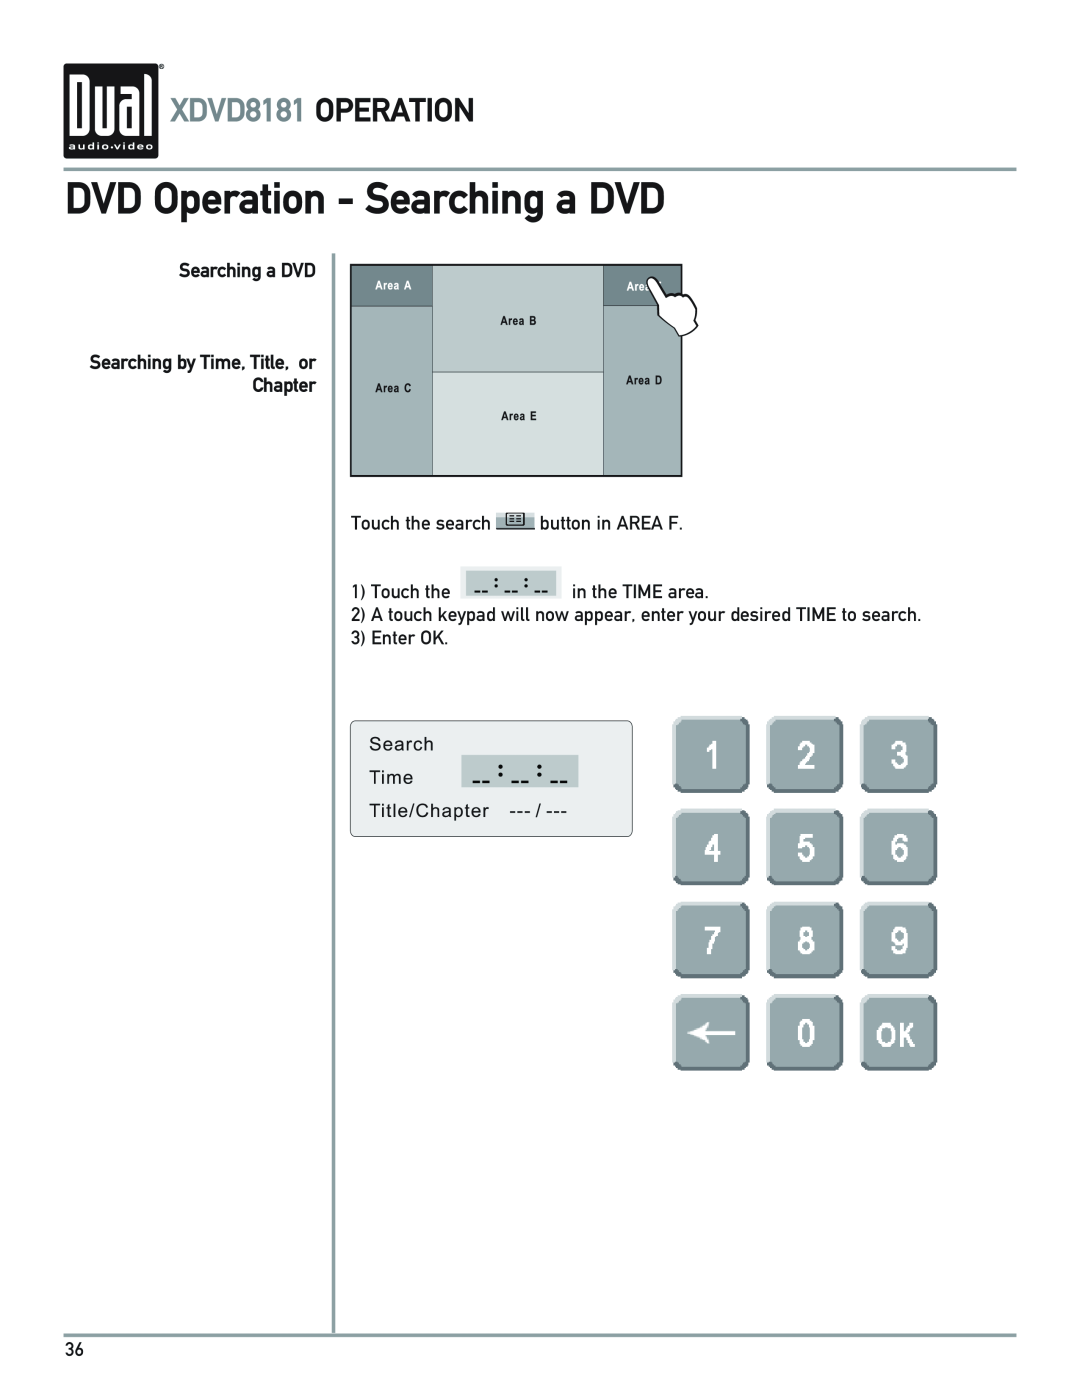 Dual DVD Operation - Searching a DVD, XDVD8181 OPERATION, Searching a DVD Searching by Time, Title, or, Chapter 